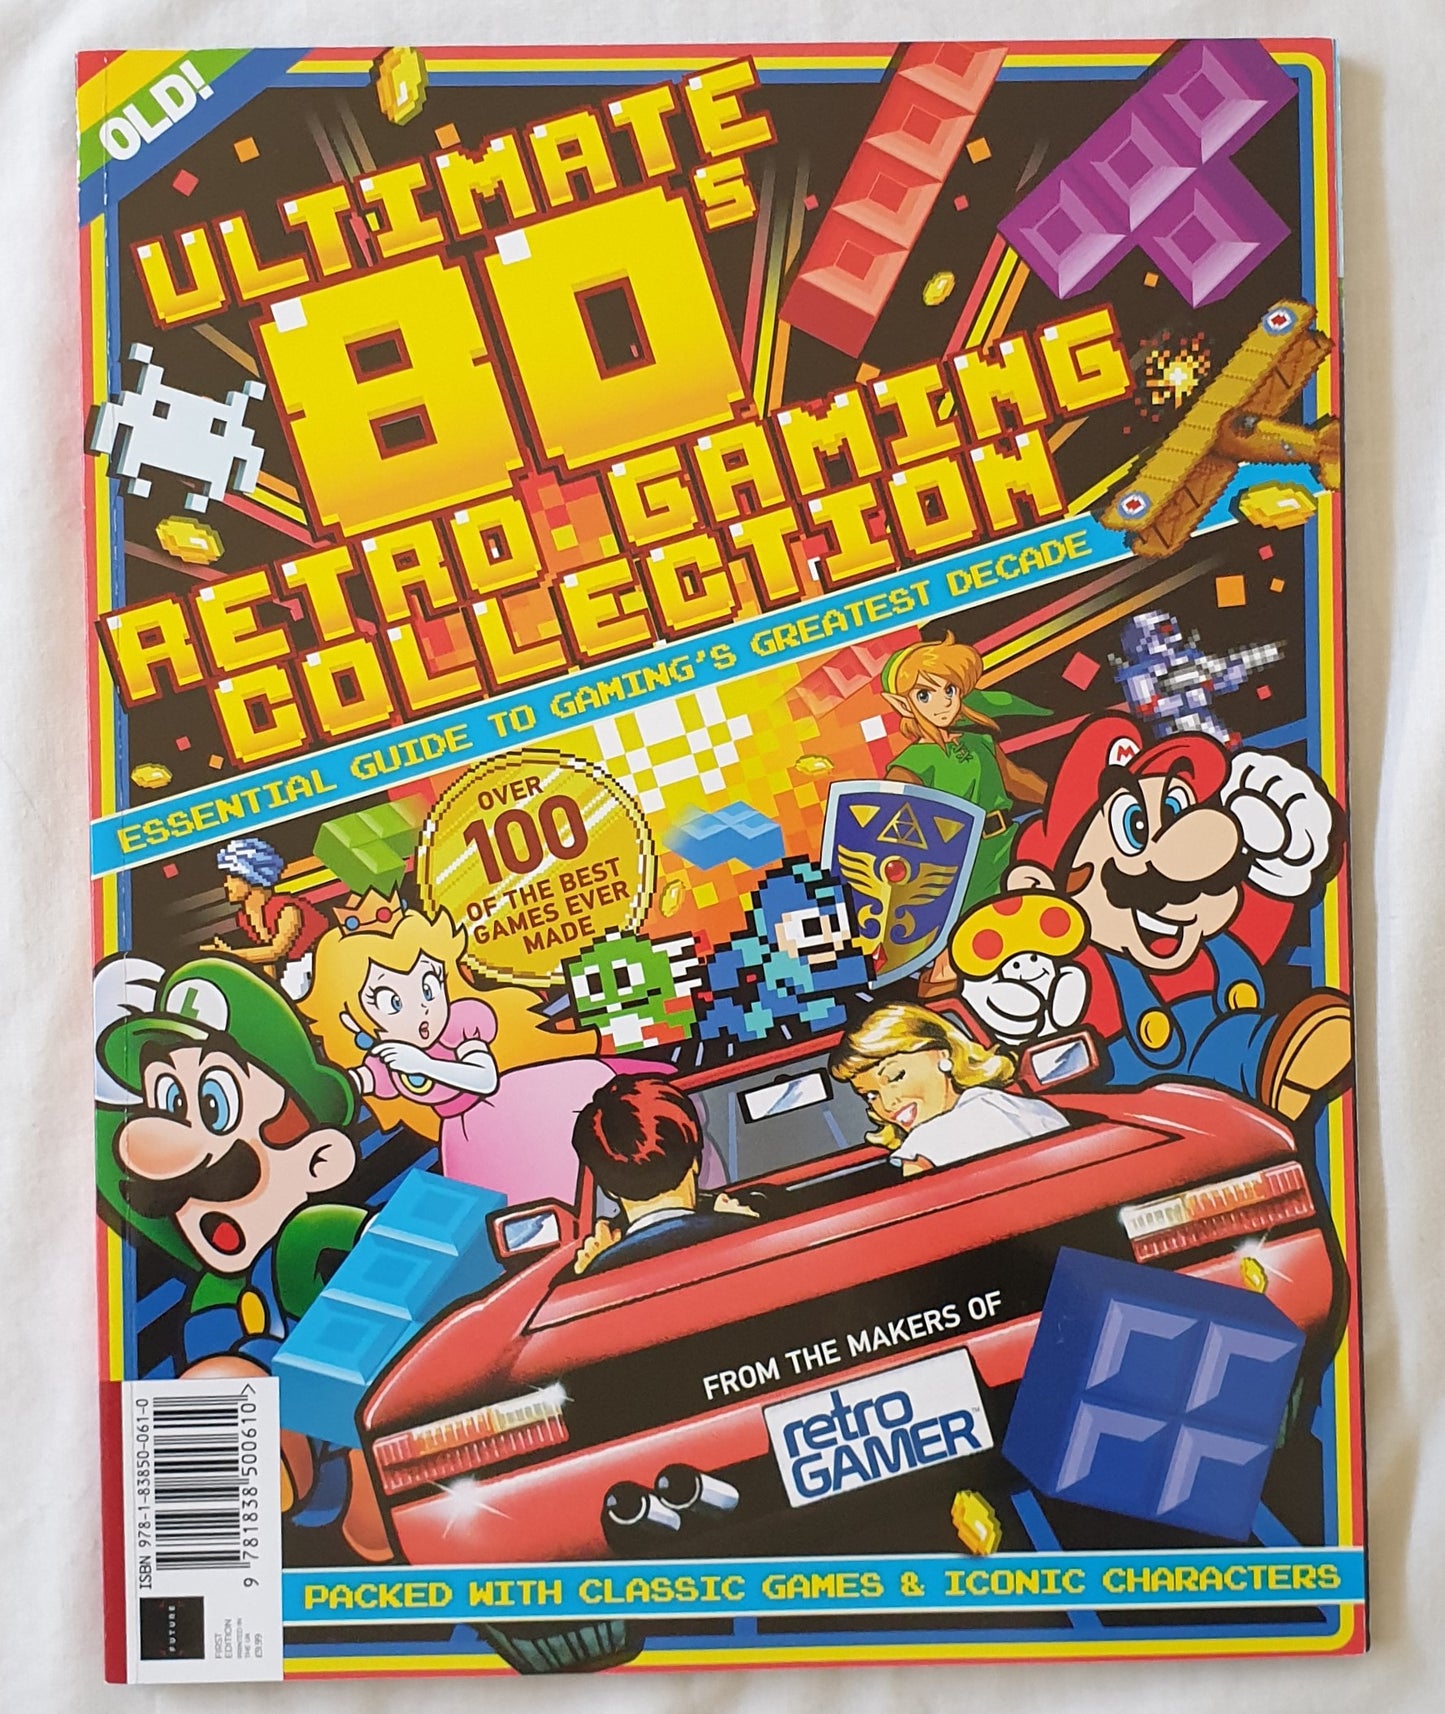 Top 10 Retro Games of All Time Reviewed - Old School Gamer Magazine